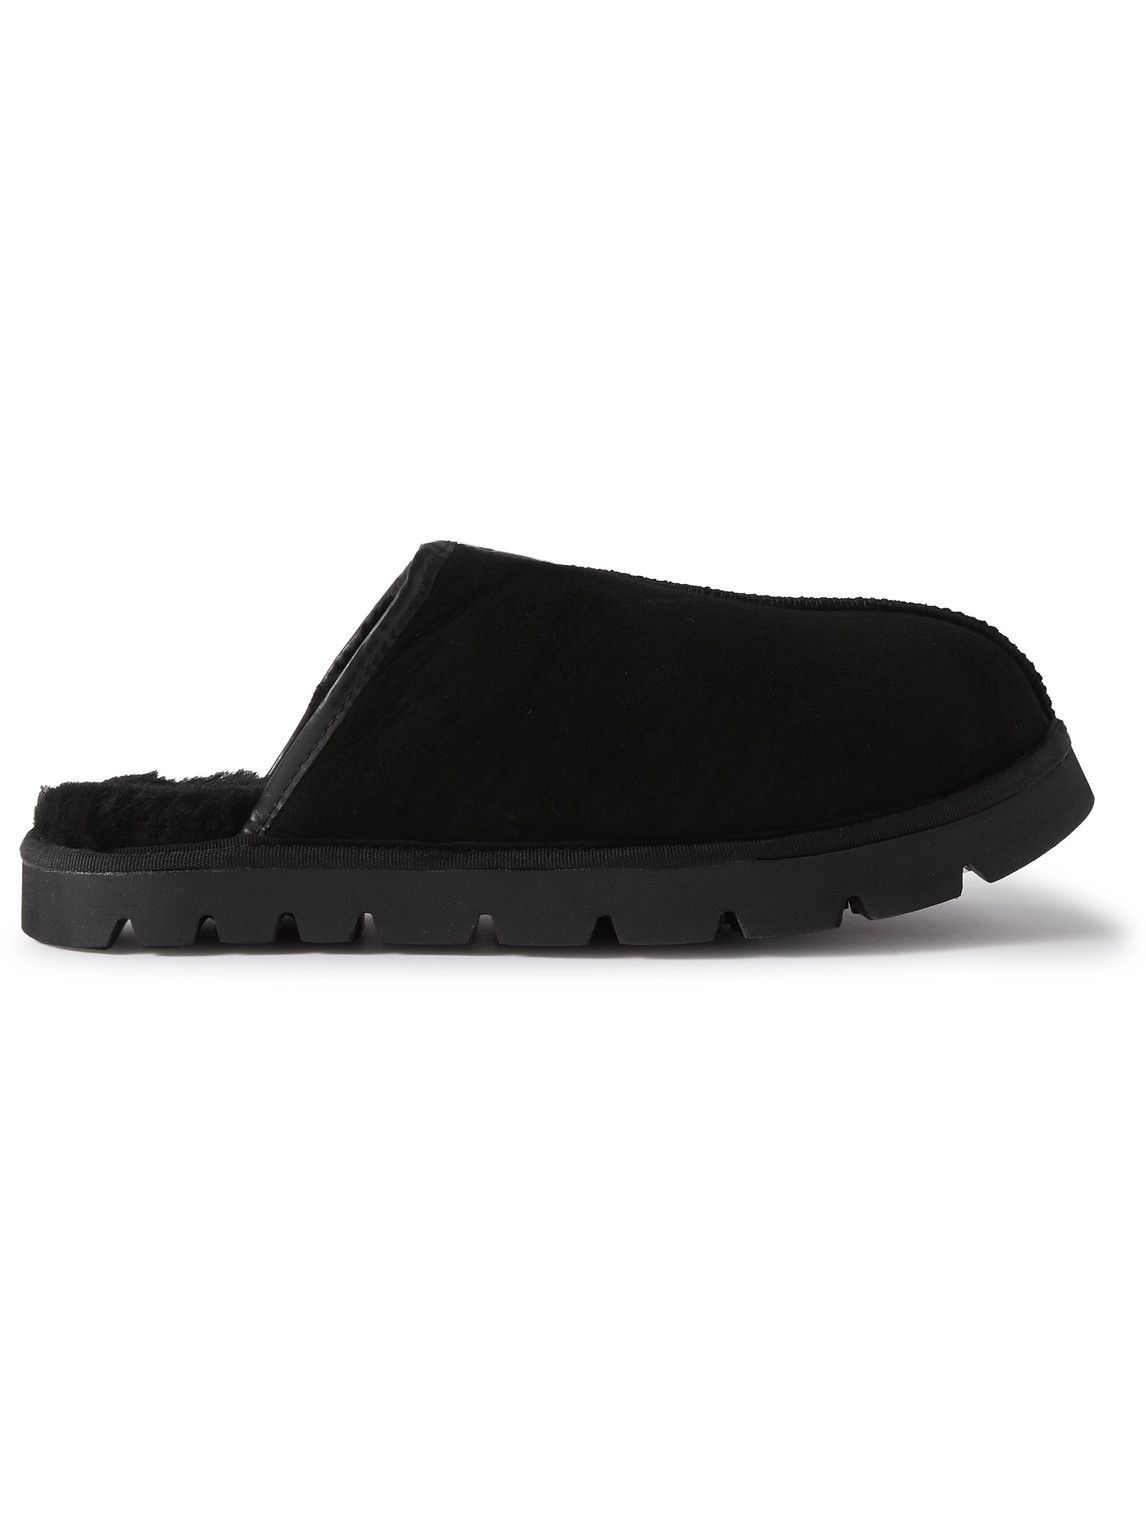 Photo: Grenson - Wainwright Shearling-Lined Suede Slippers - Black